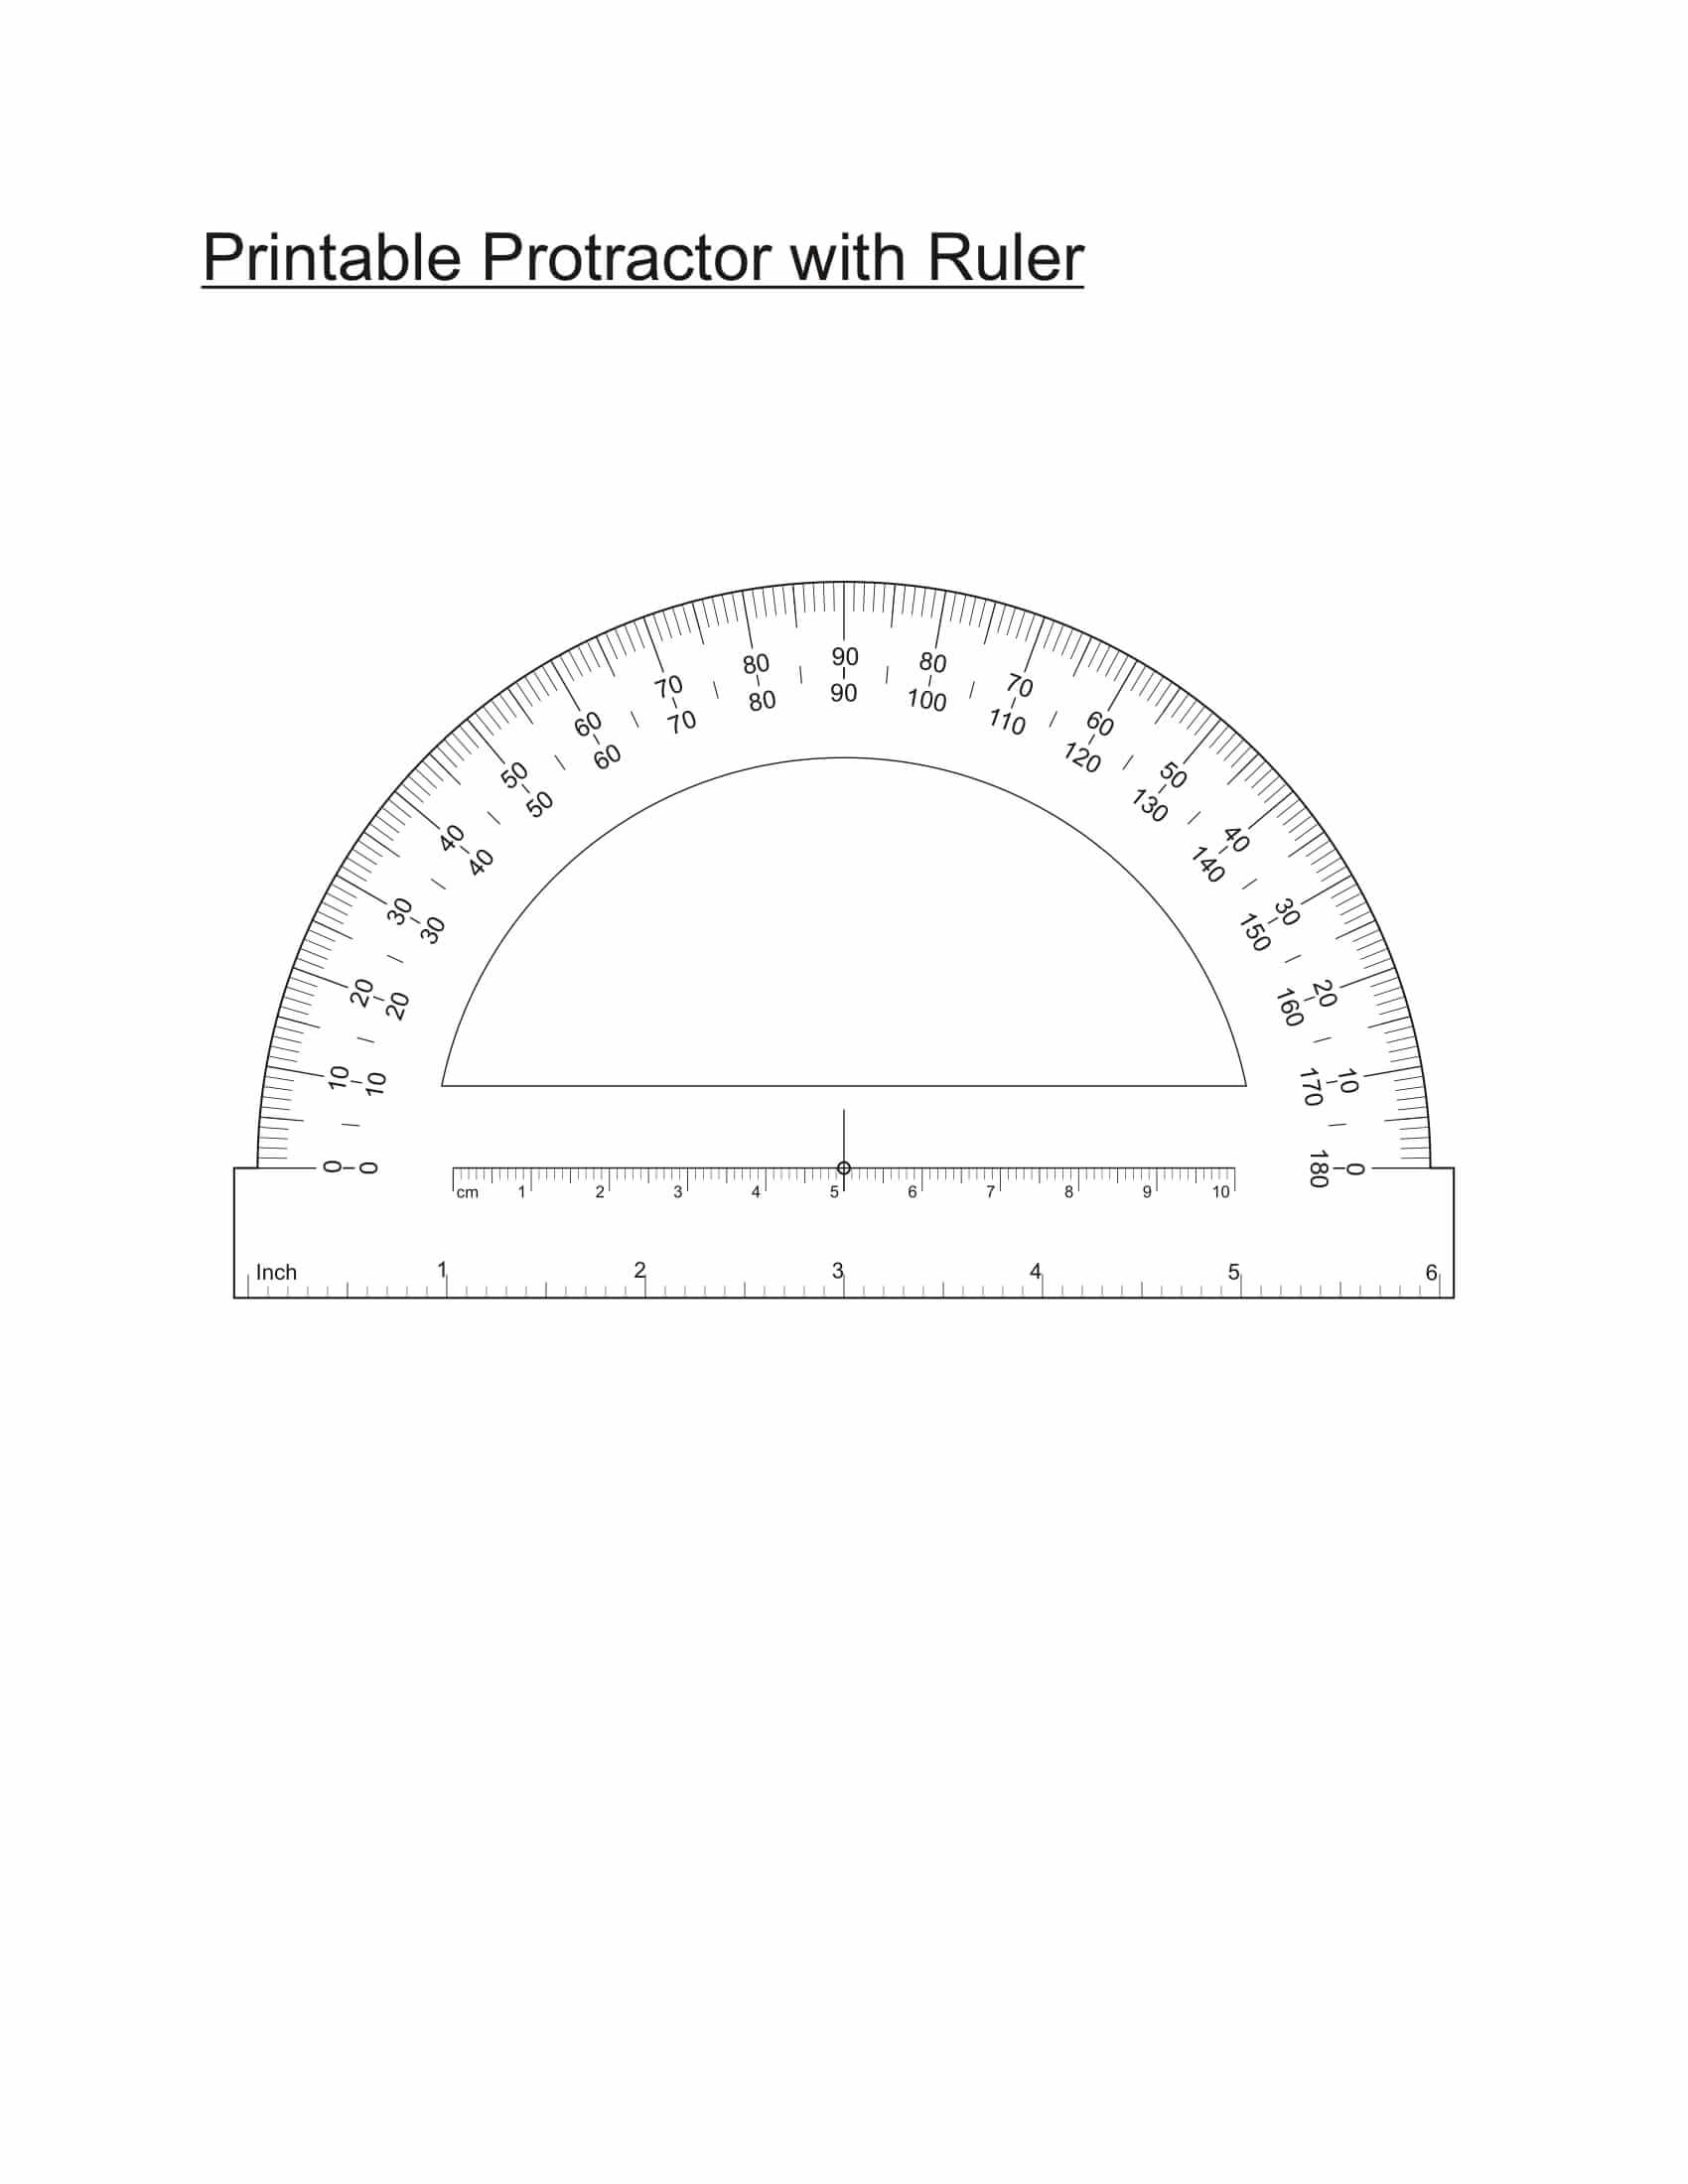 printable-protractor-with-ruler-advance-glance